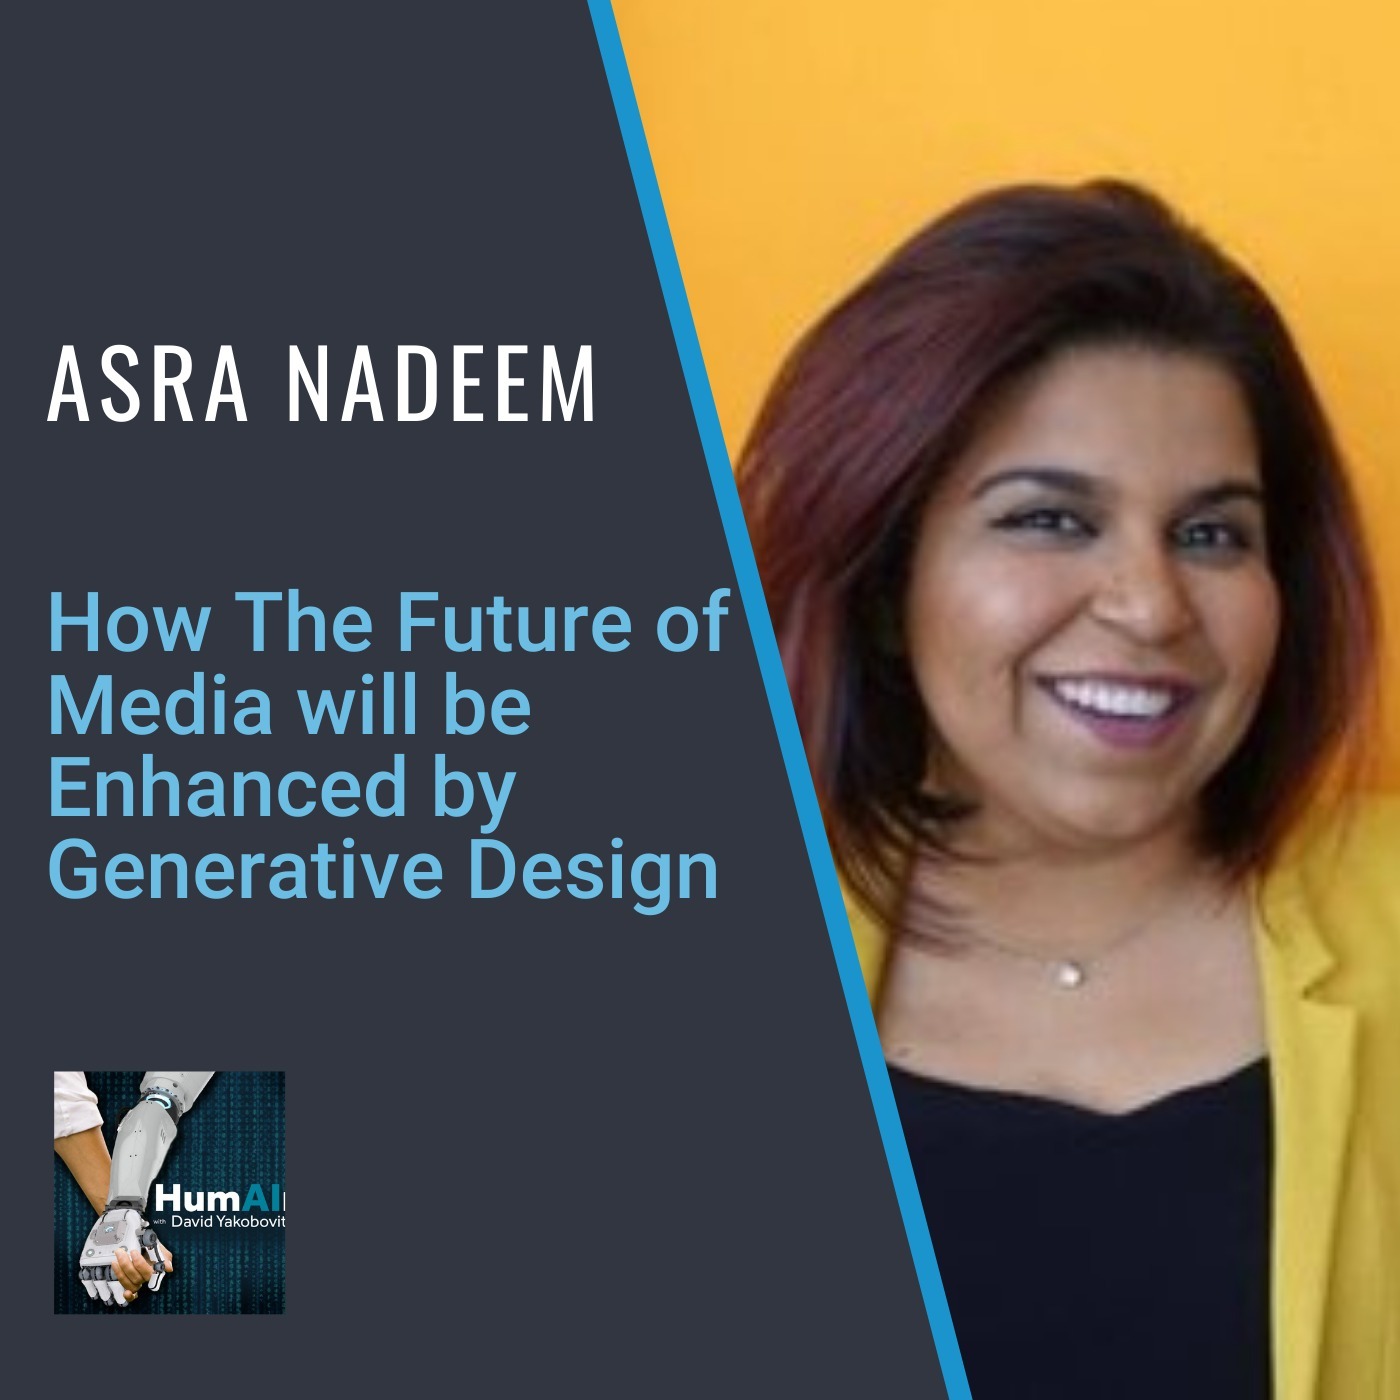 How the future of media will be enhanced by generative design with Asra Nadeem